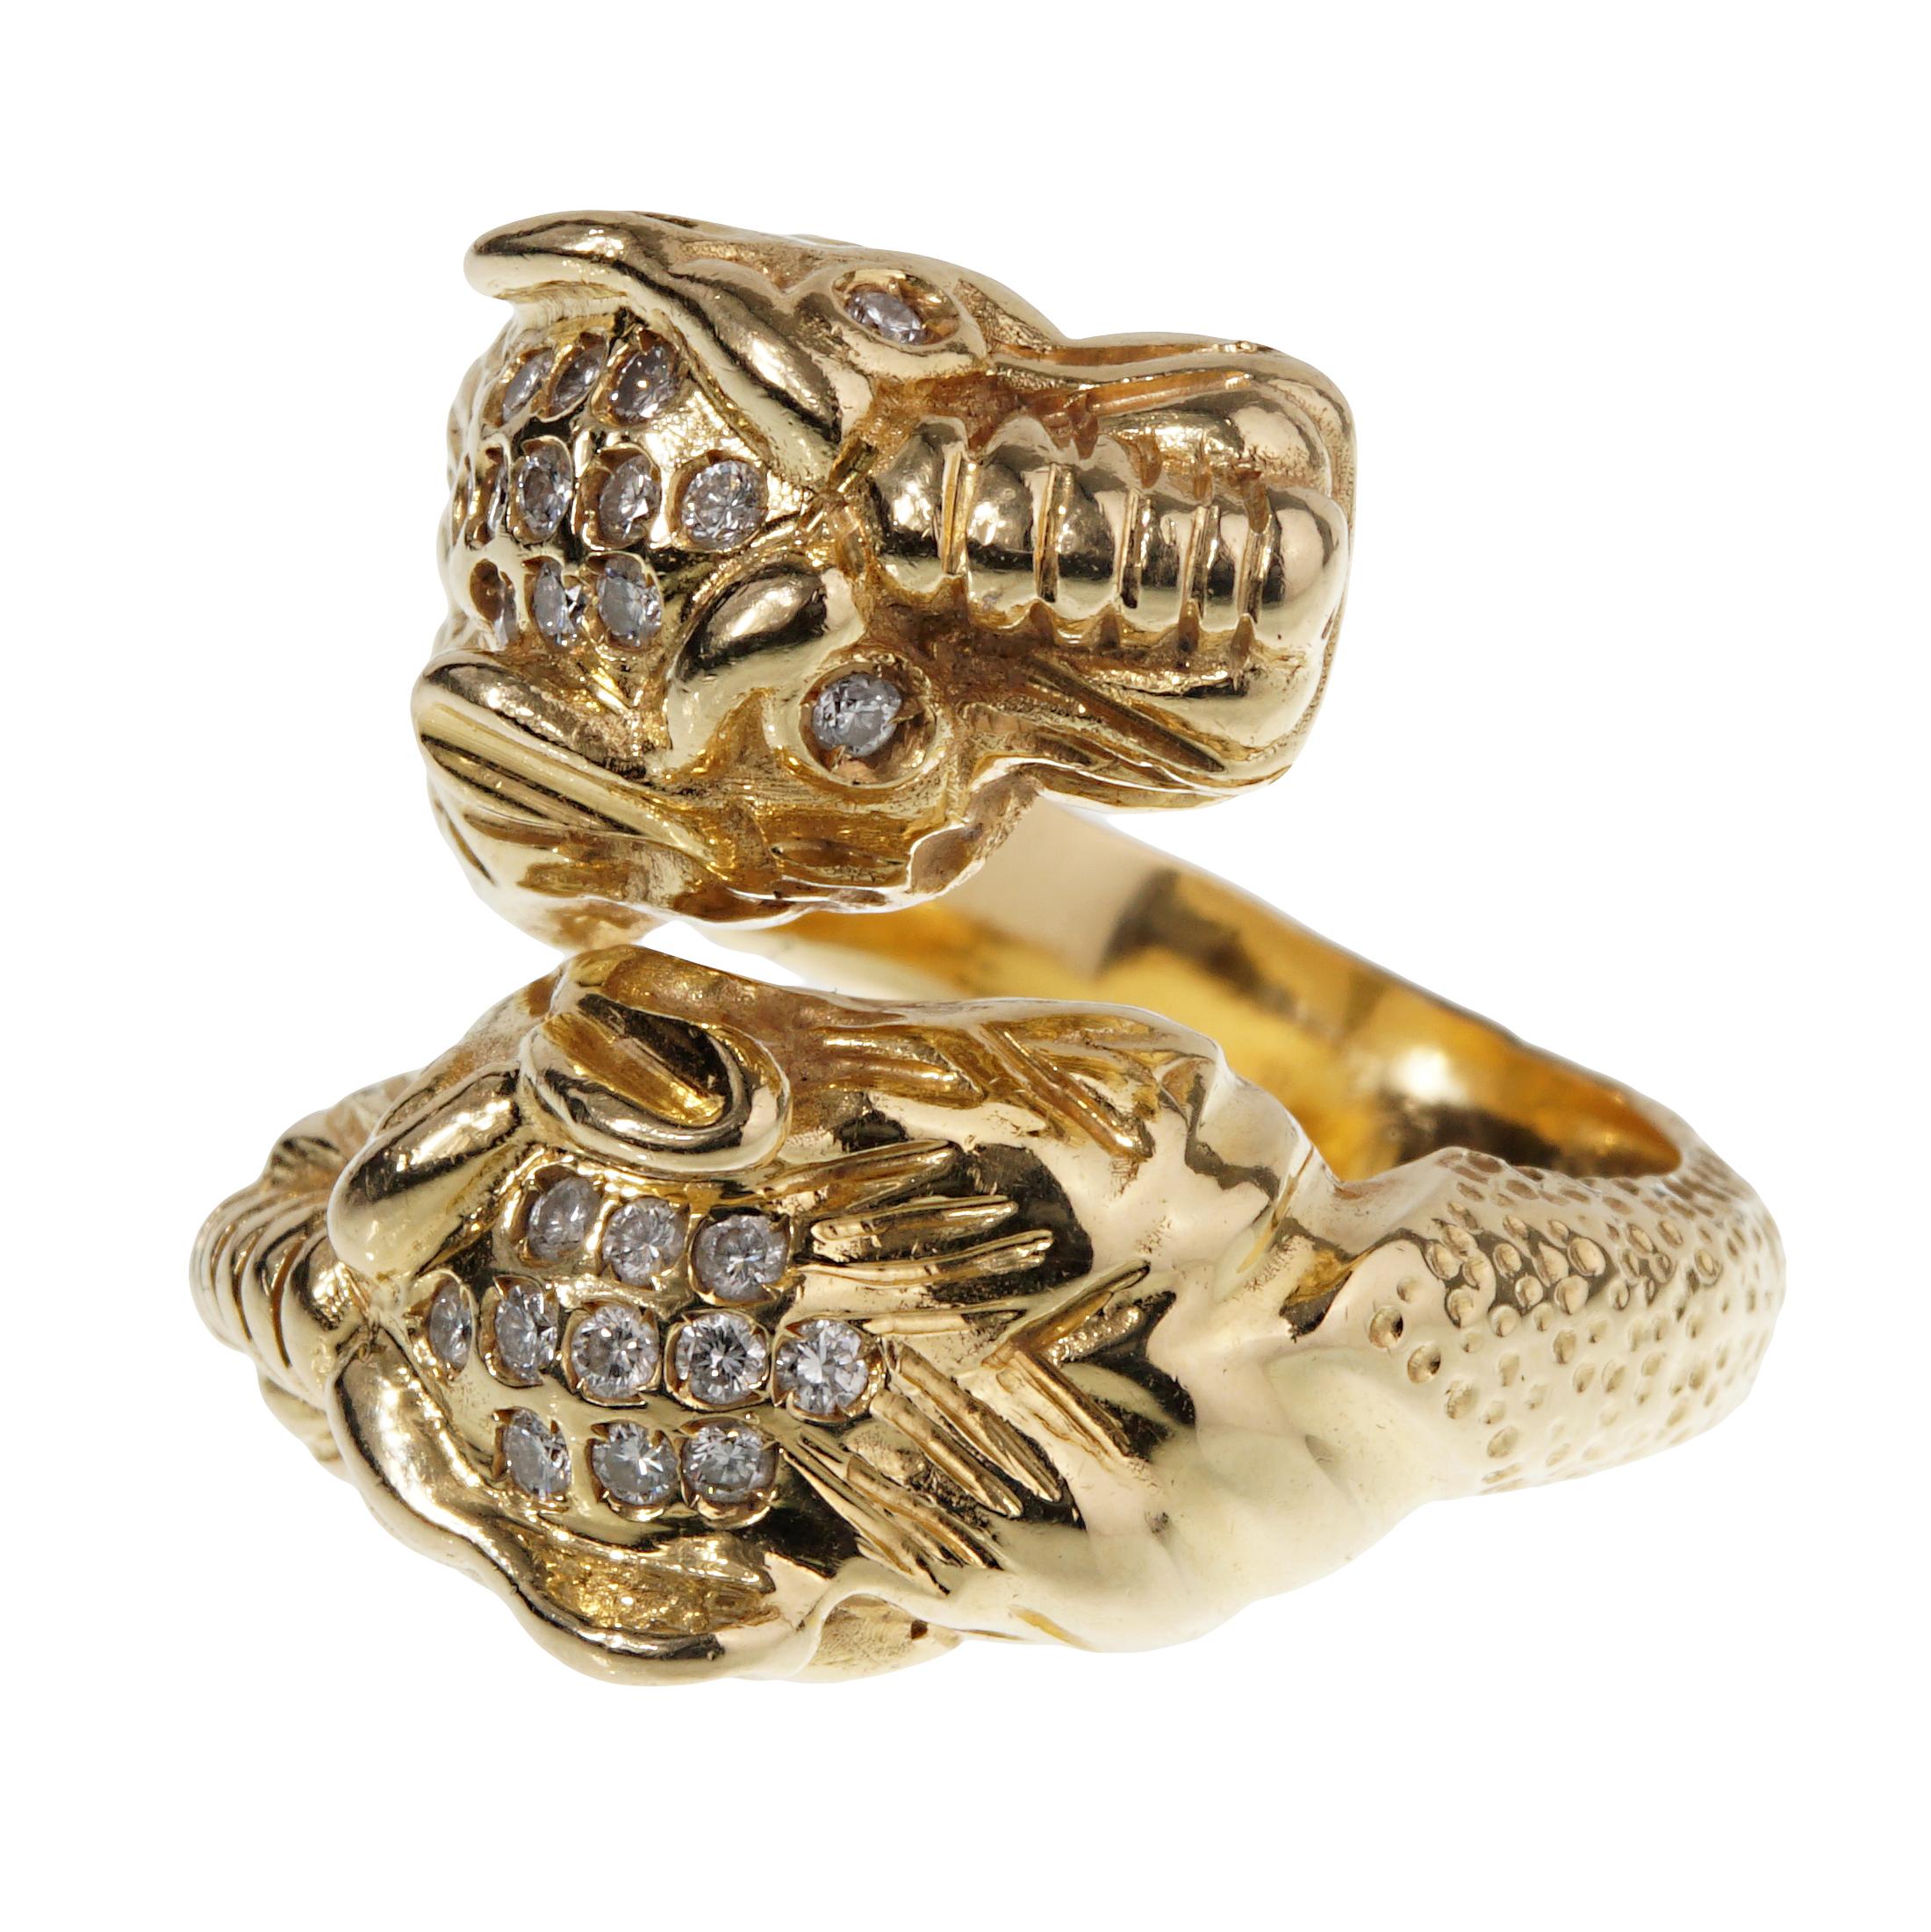 A fierce Gucci cocktail ring showcasing 2 tiger heads adorned with round brilliant cut diamonds set in 18k yellow gold, this fabulous ring measures a size 6 and can be resized if needed.